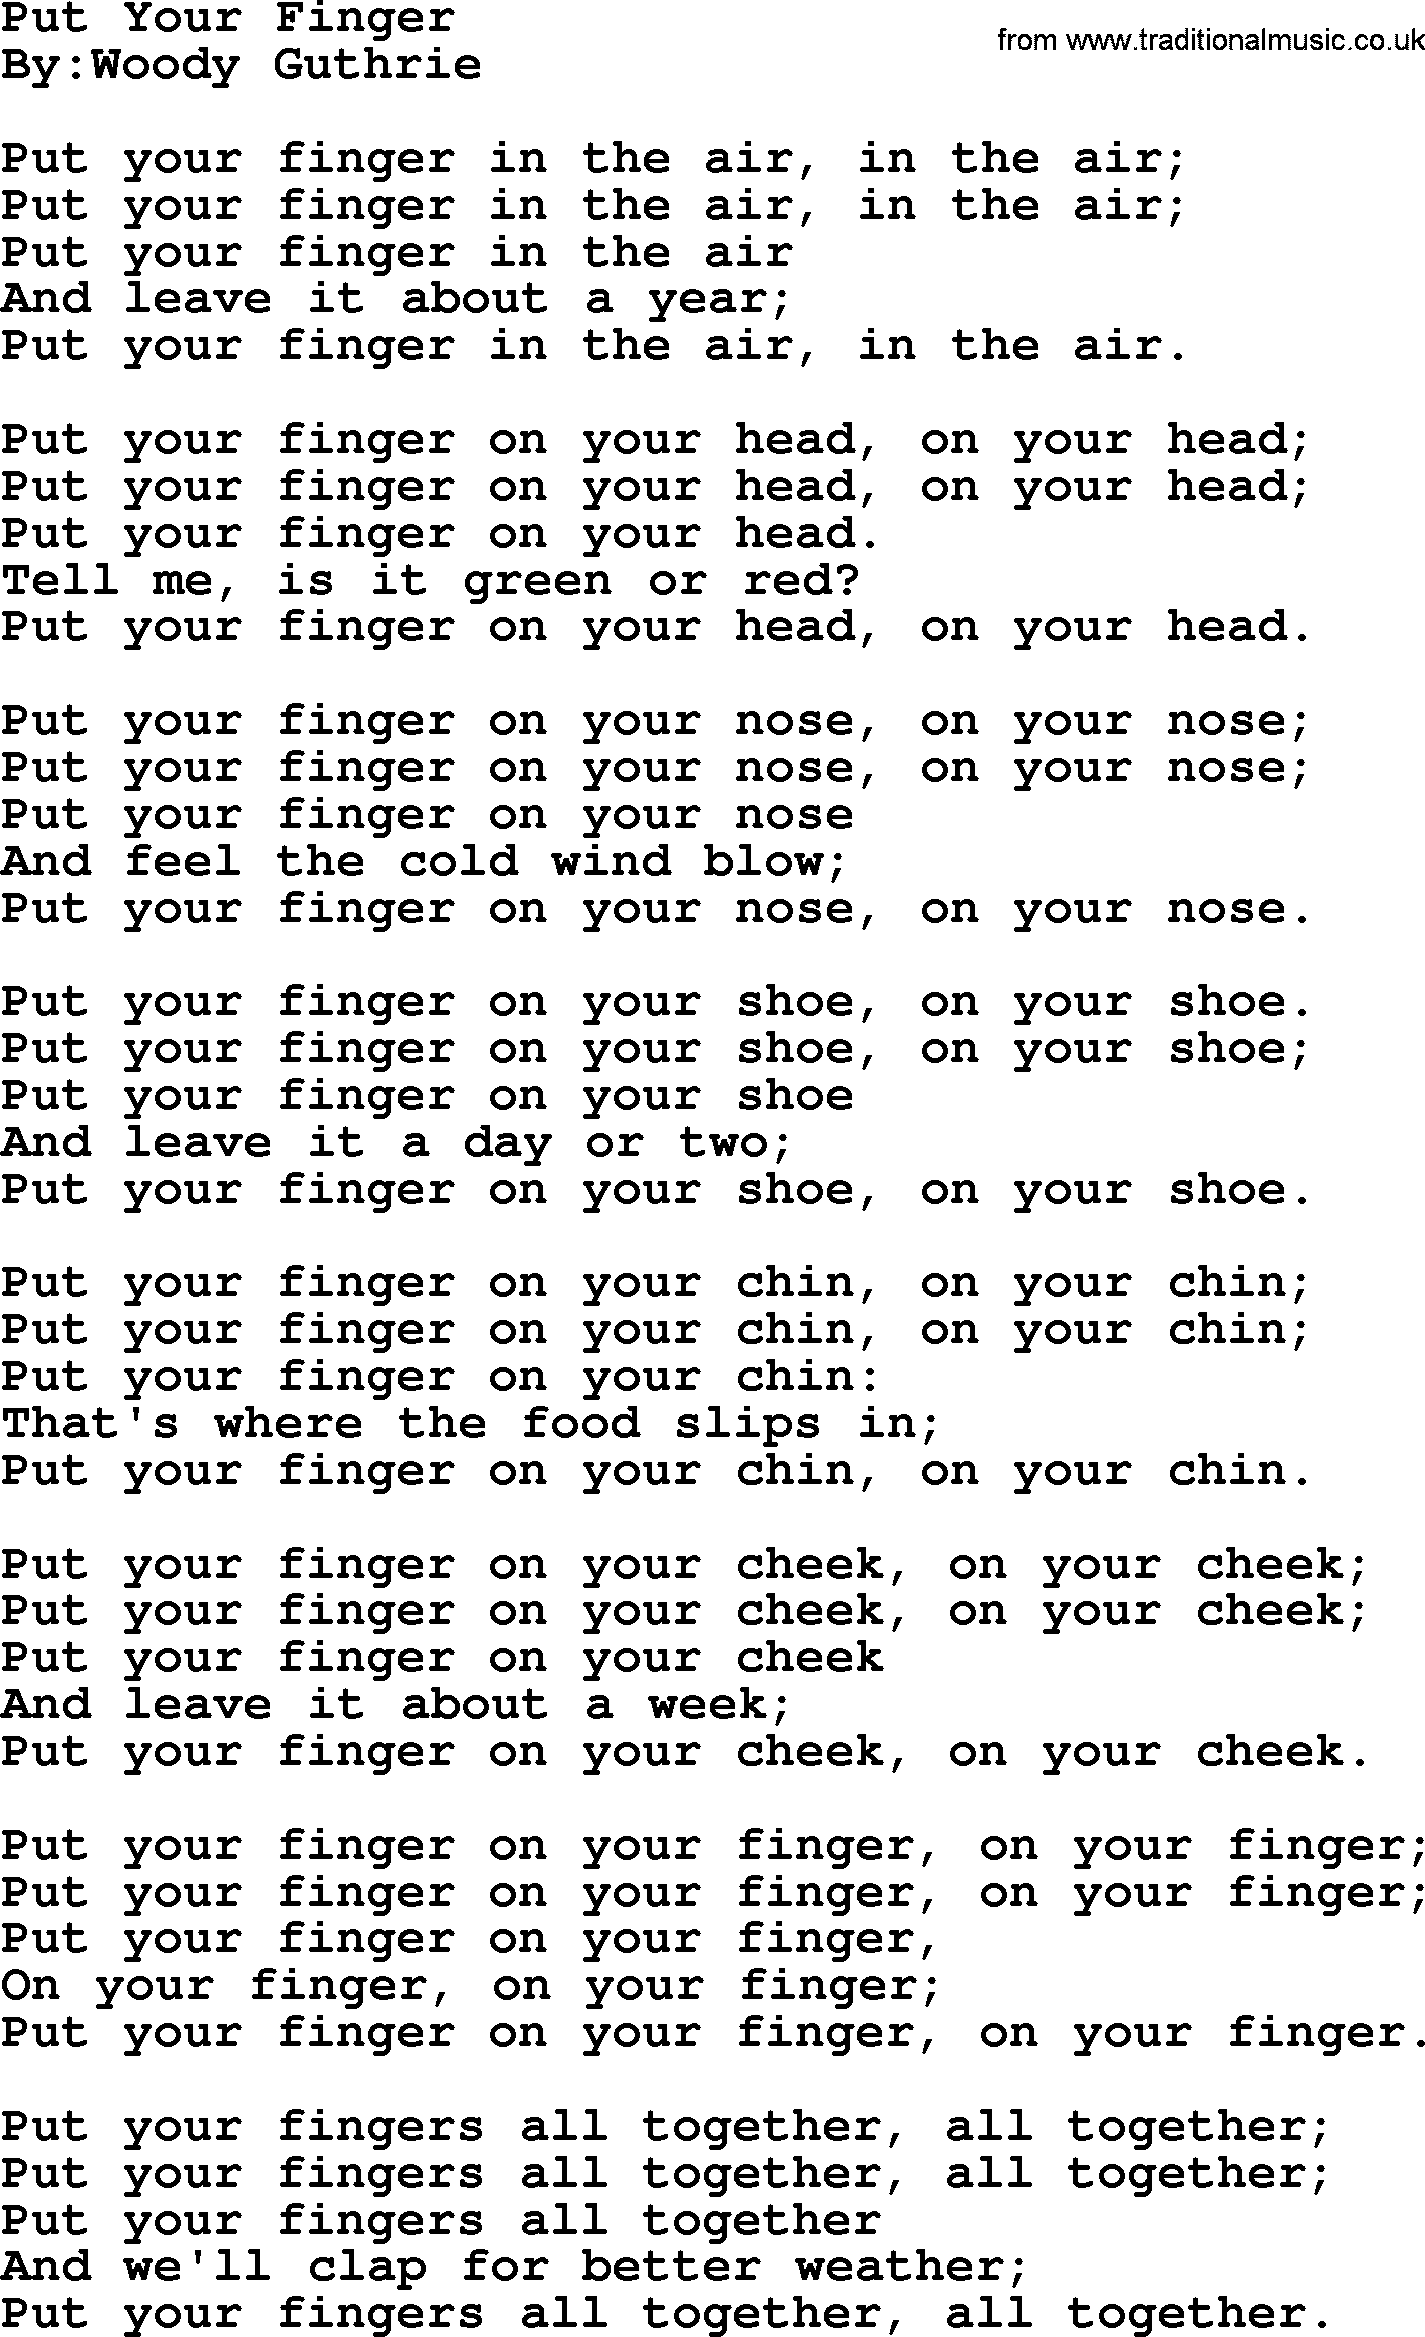 Political, Solidarity, Workers or Union song: Put Your Finger, lyrics